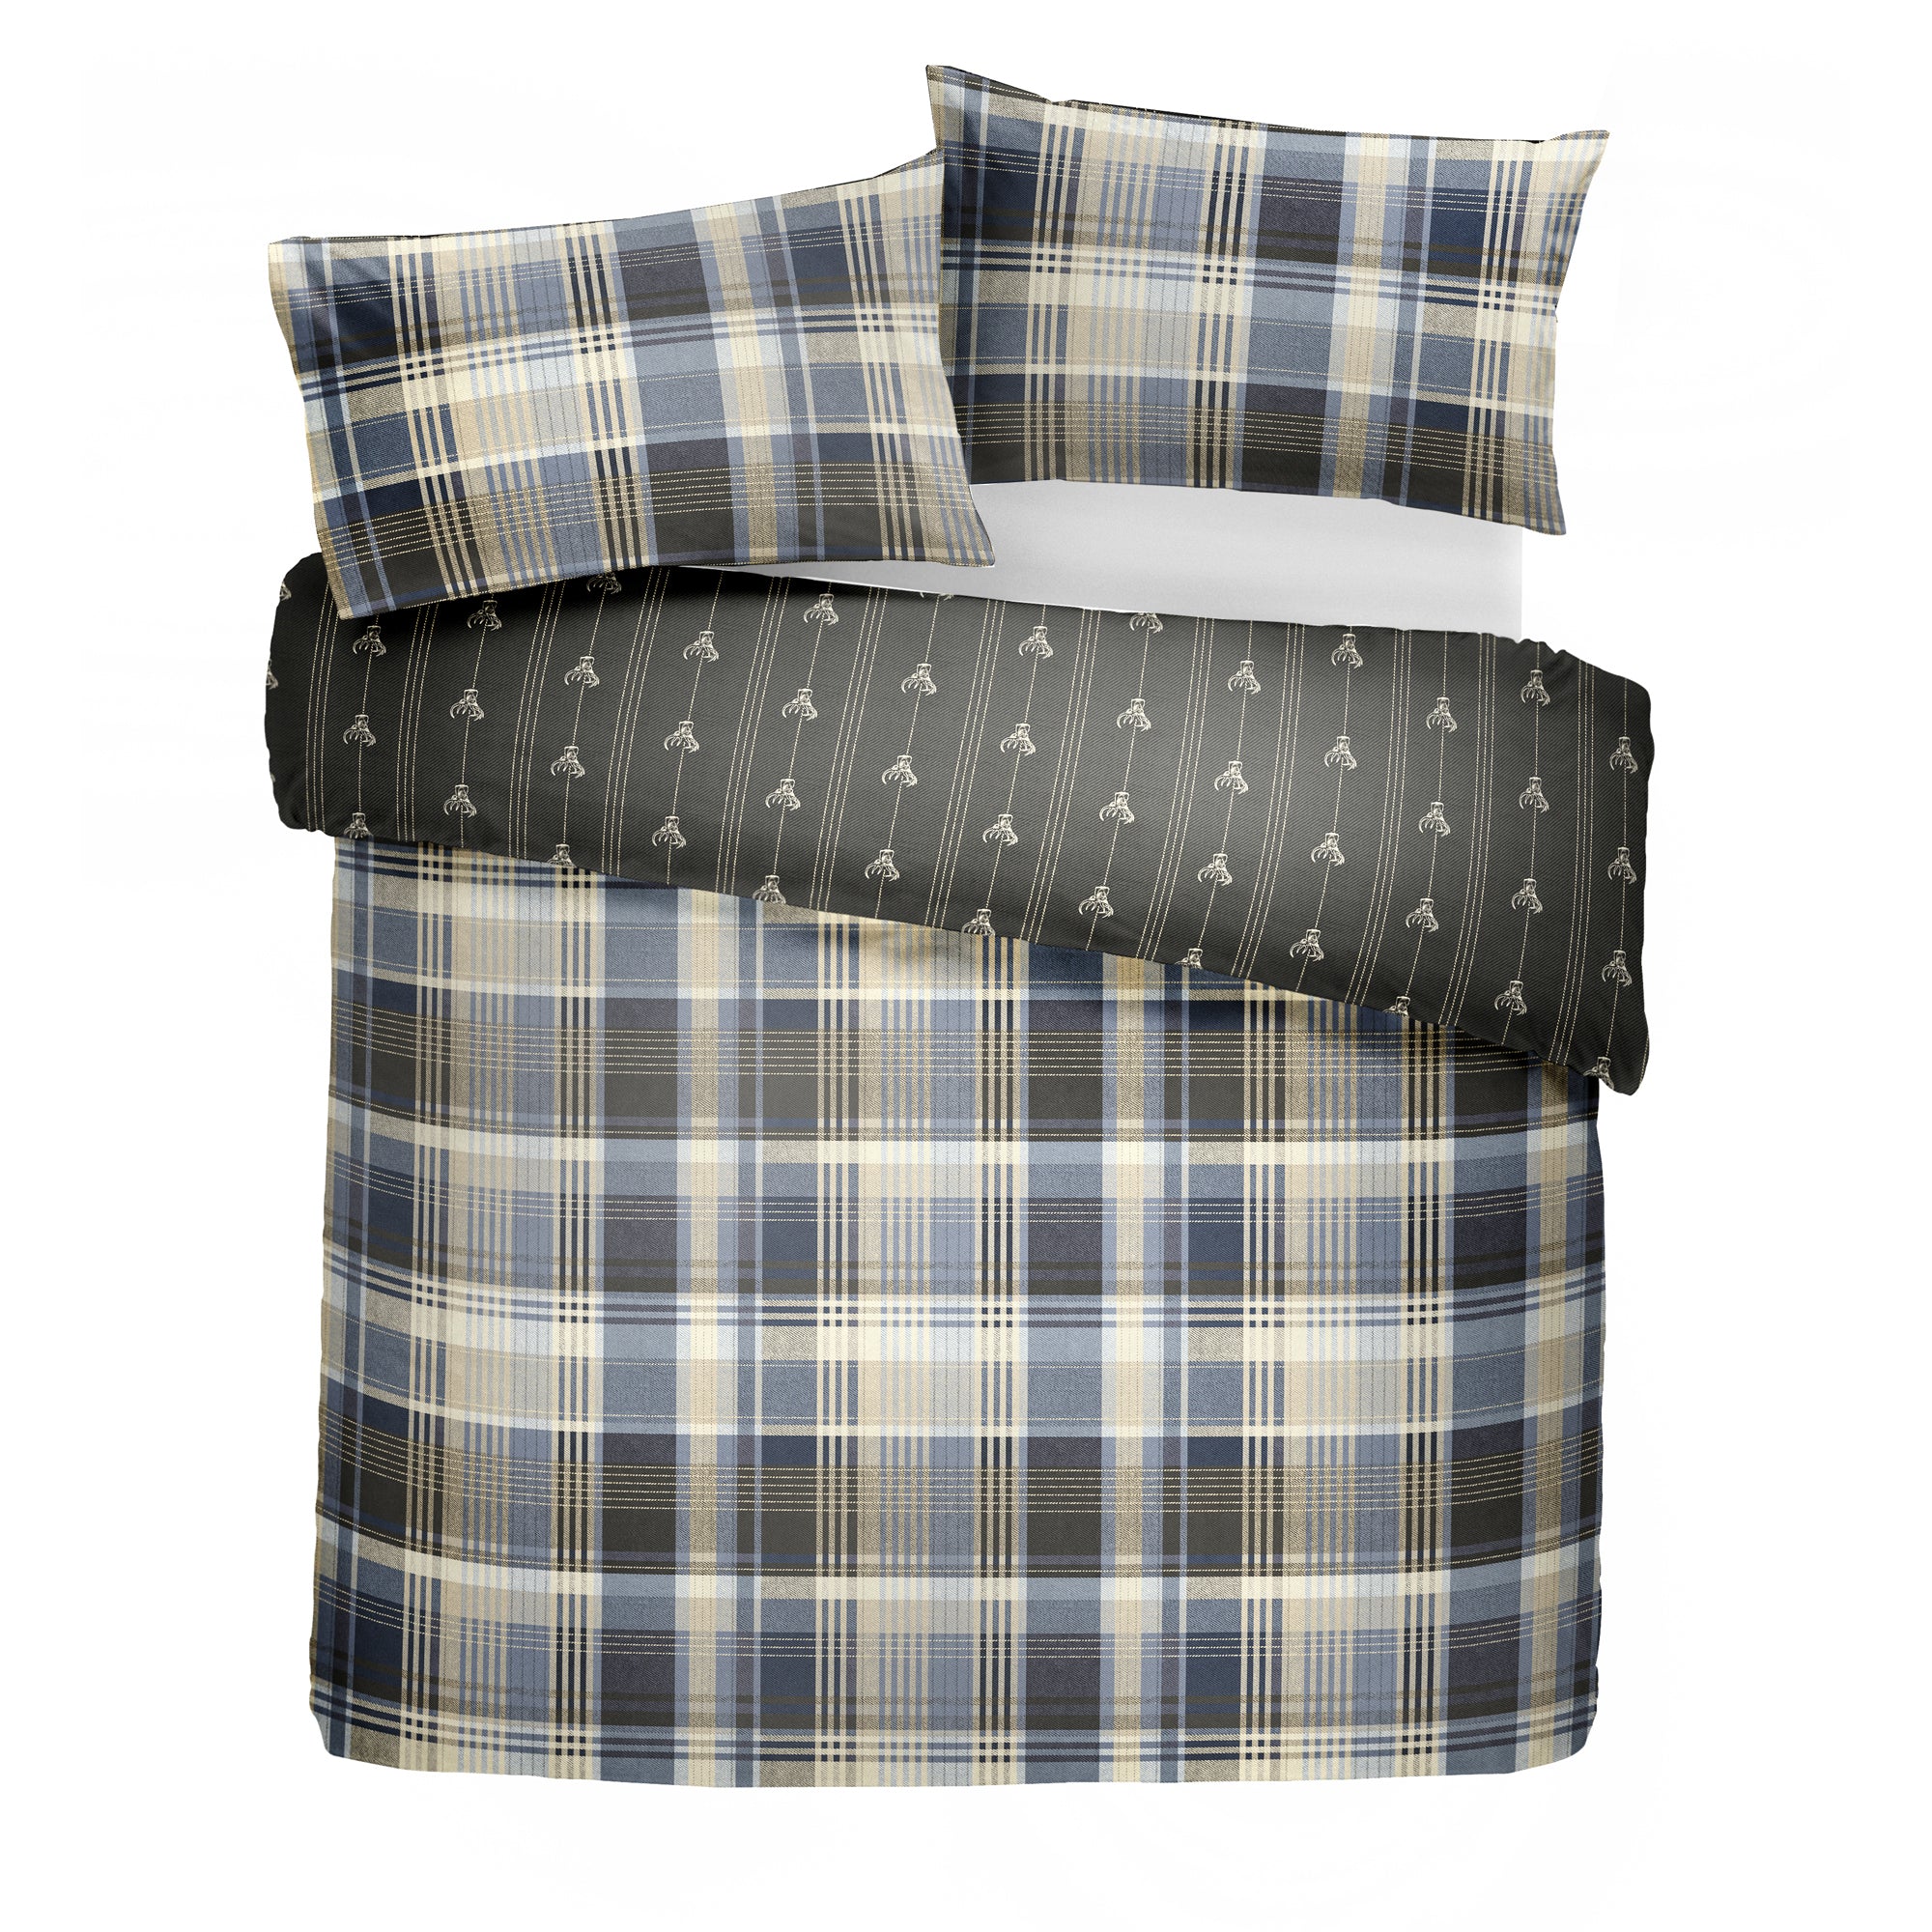 Connolly Check - 100% Brushed Cotton Checked Duvet Set in Charcoal - by D&D Lodge